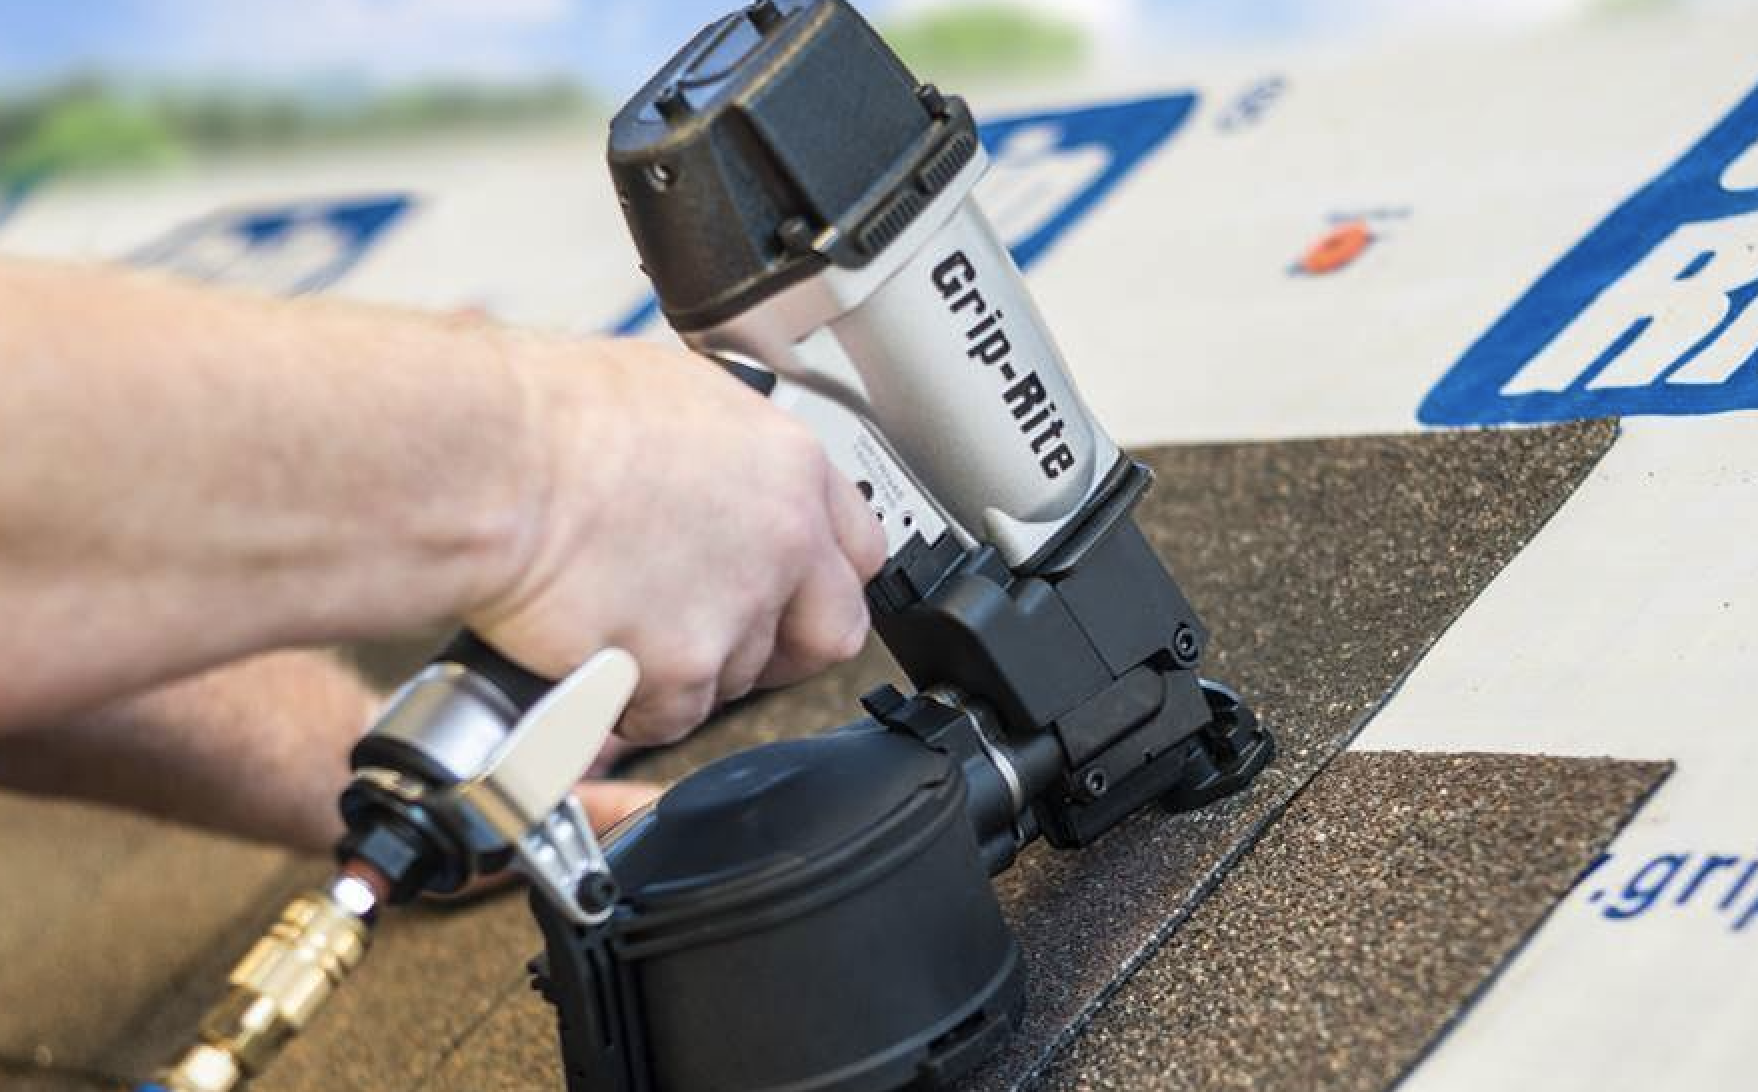 Grip-Rite Coil Roofing Nailer